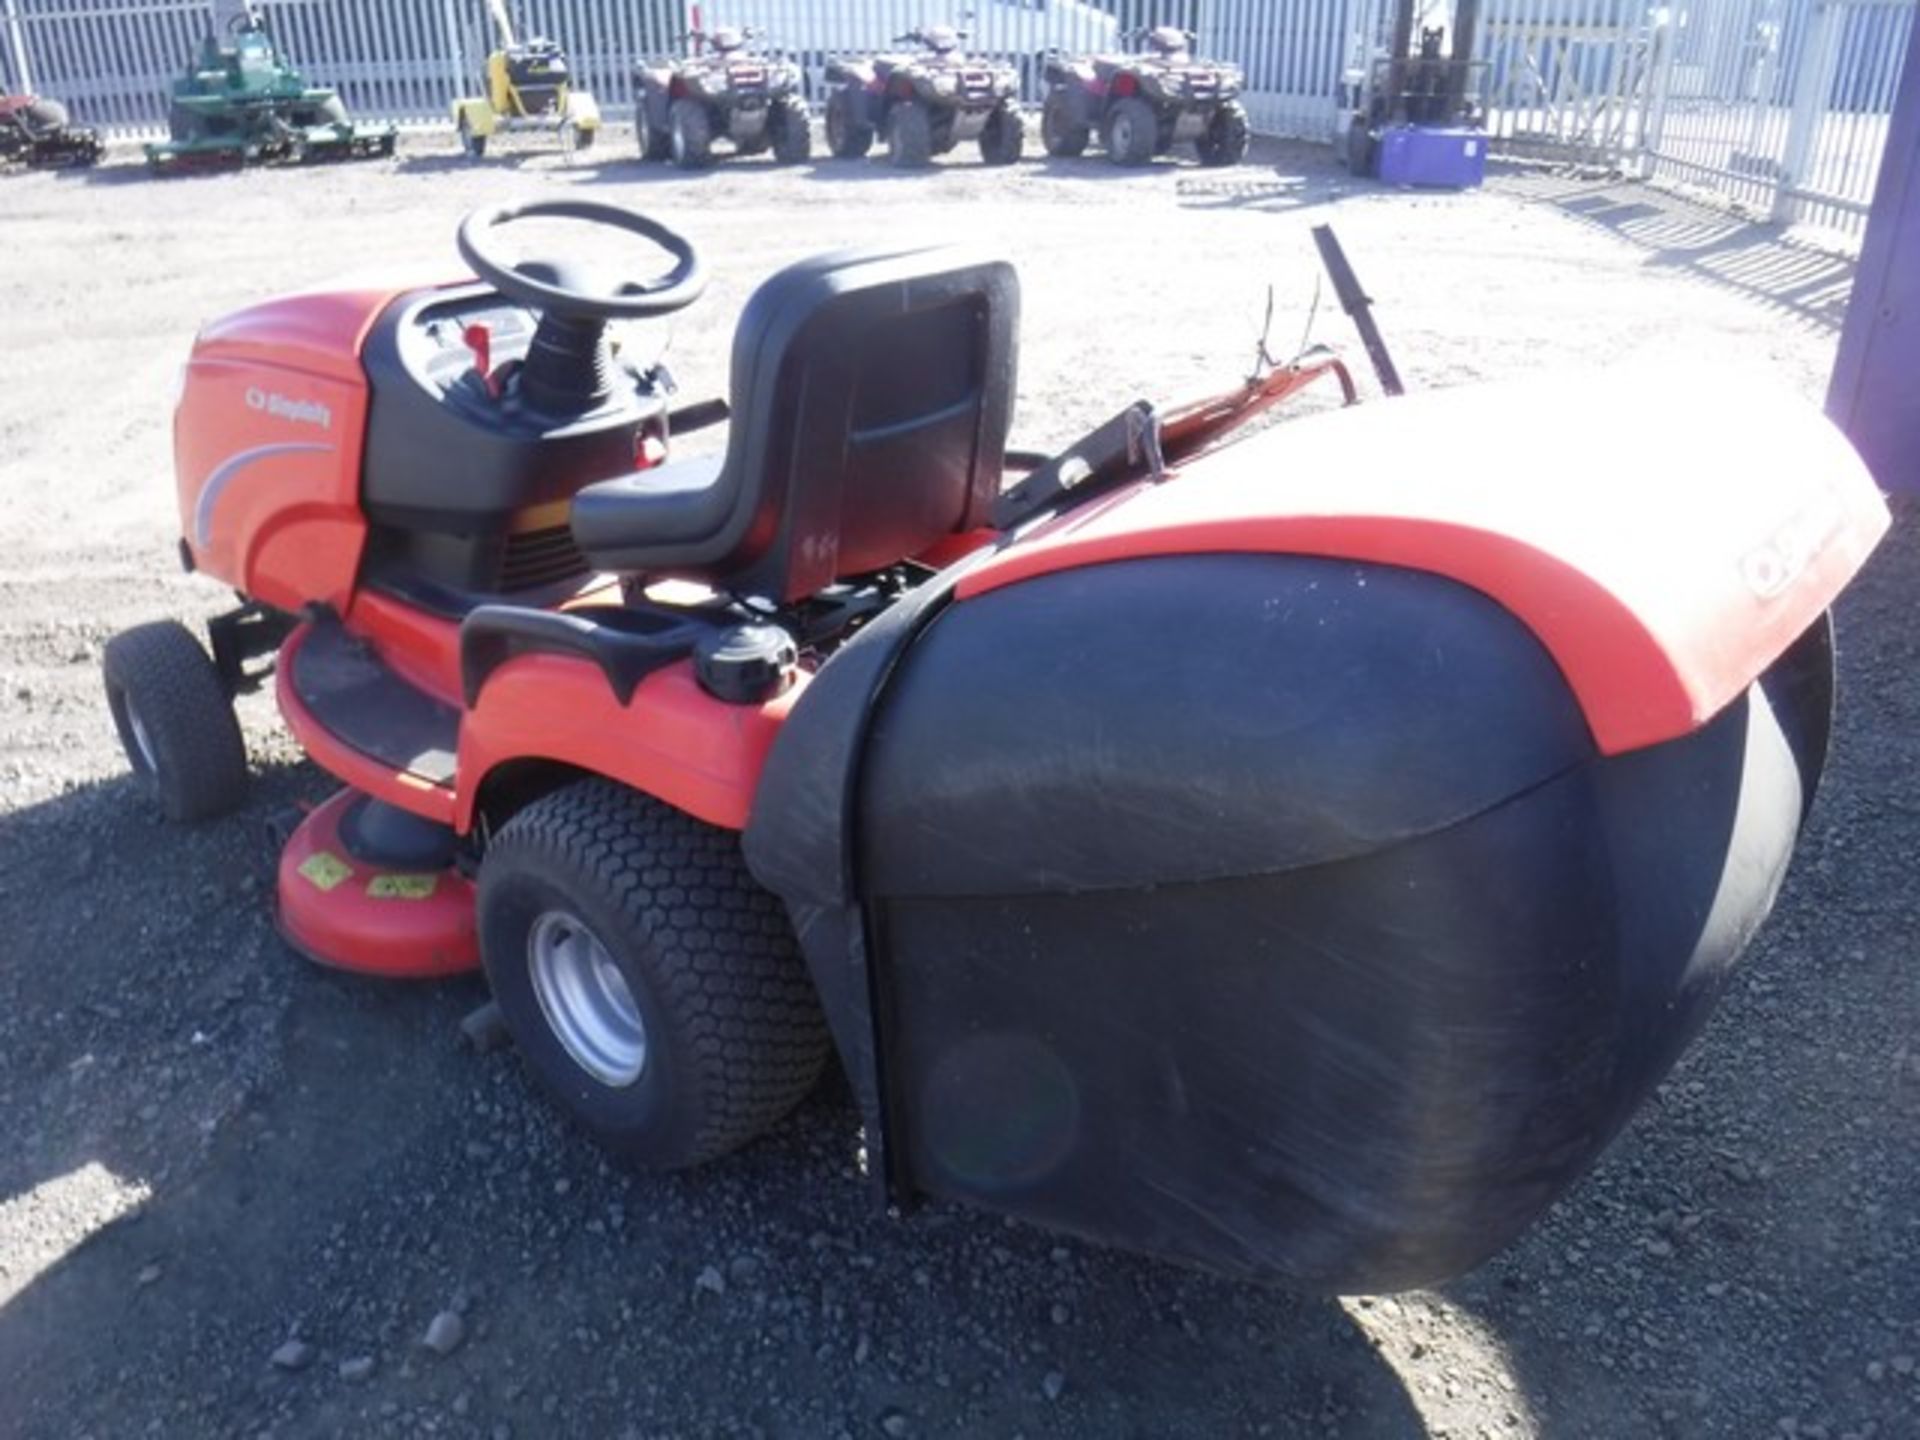 SIMPLICITY 2003 RIDE ON MOWER BARON 18HP, BRIGGS AND STRATTON ENGINE 508.0 HOURS - Image 5 of 7